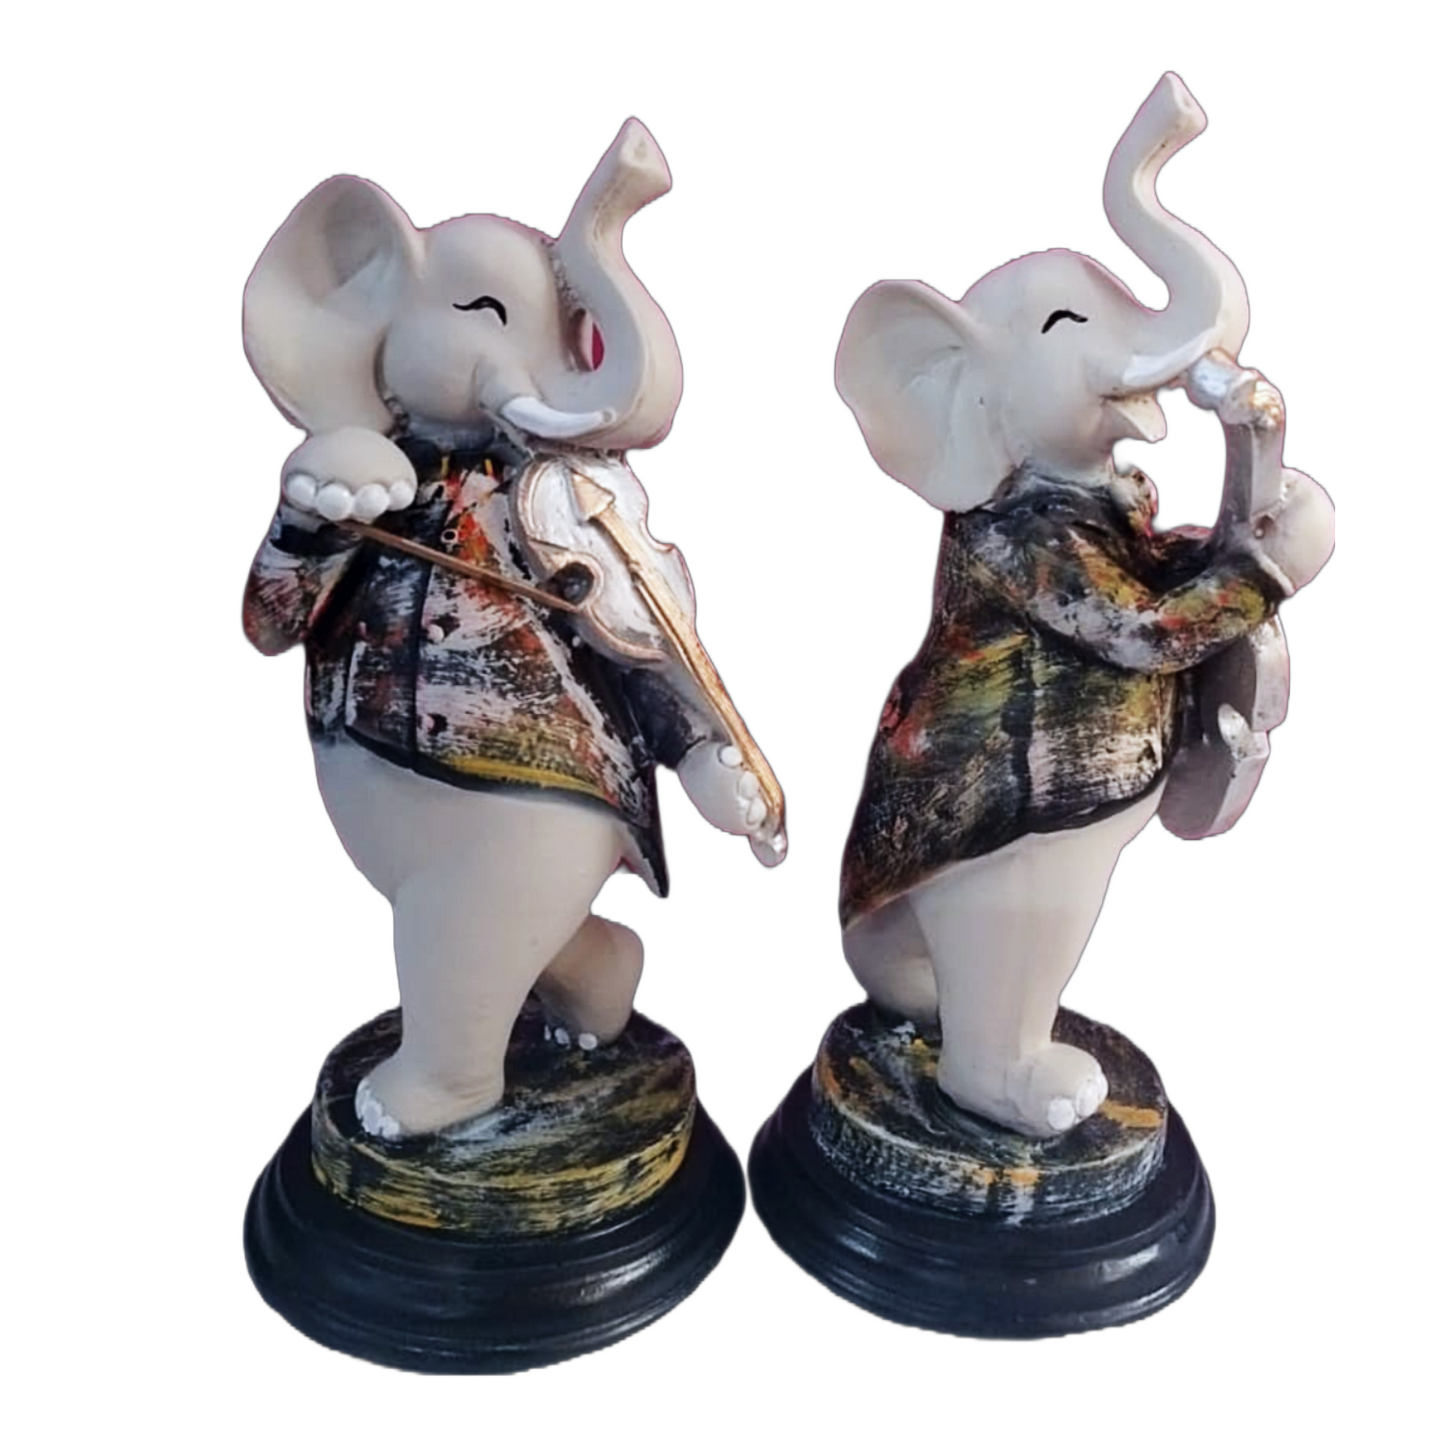 Statue ALiLA Musical Elephants Statue Showpiece Idol Exclusive for Gifting & Home Table Decoration, 10 inches Height Statue